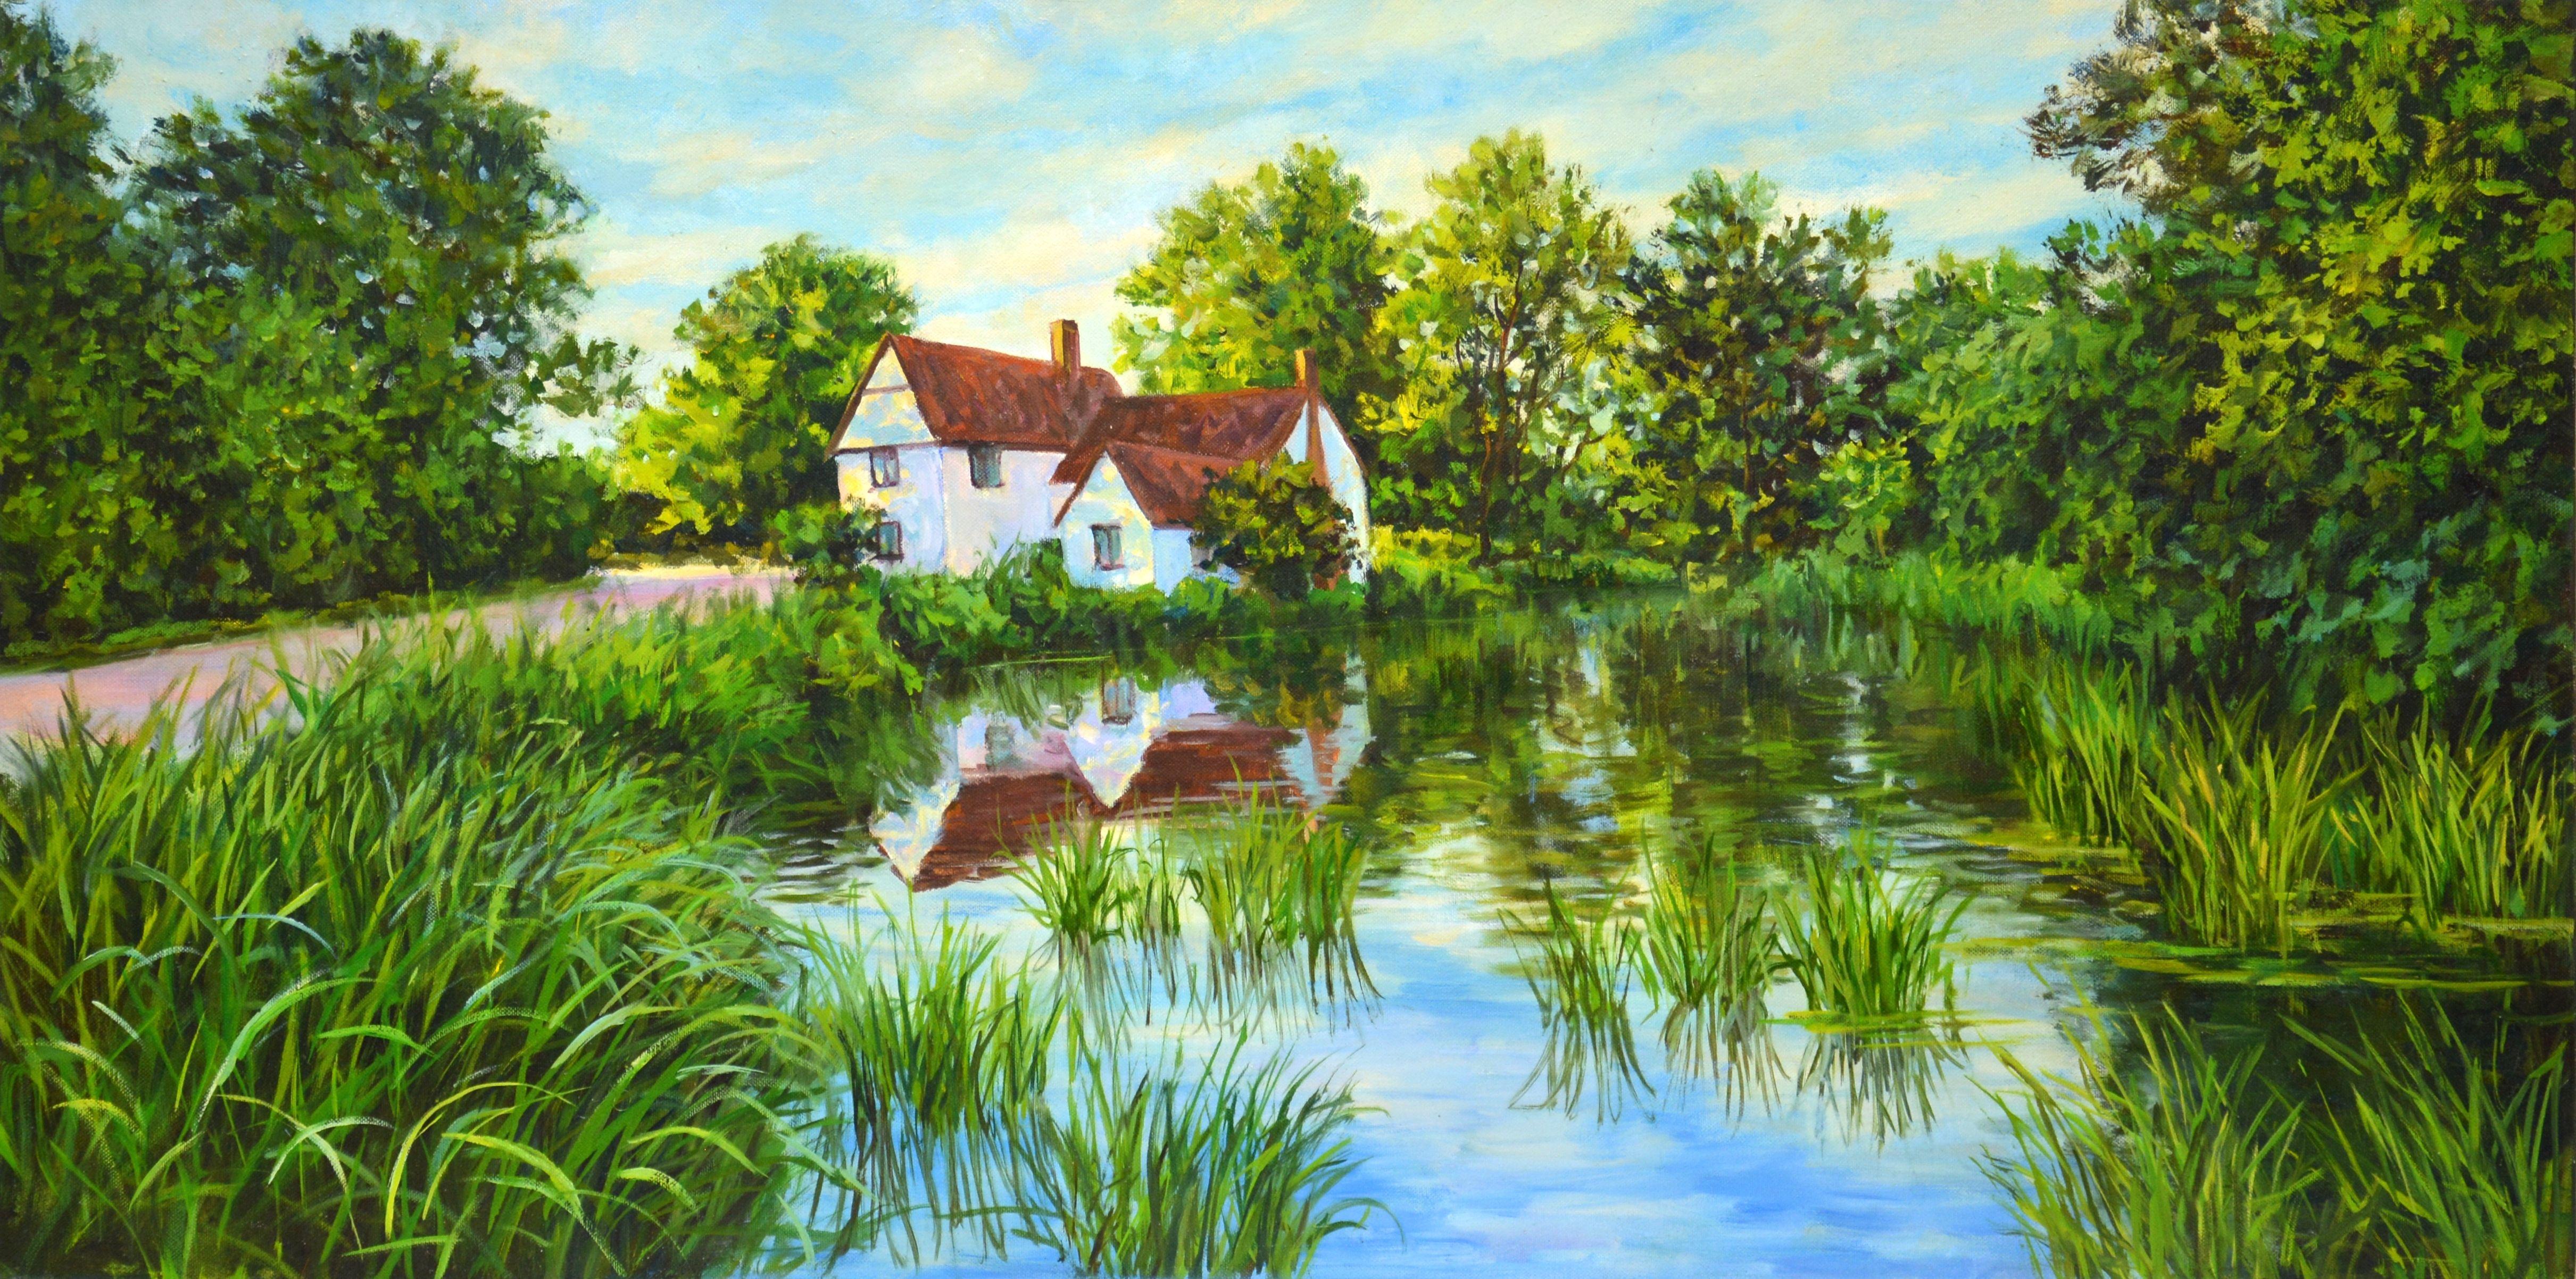 English landscape. English house by the river, grass, trees, sky with clouds, summer landscape. Realism. A saturated palette of green, white, blue, emphasize the energy of summer. The picture has a good spatial quality, and the colors cause childish